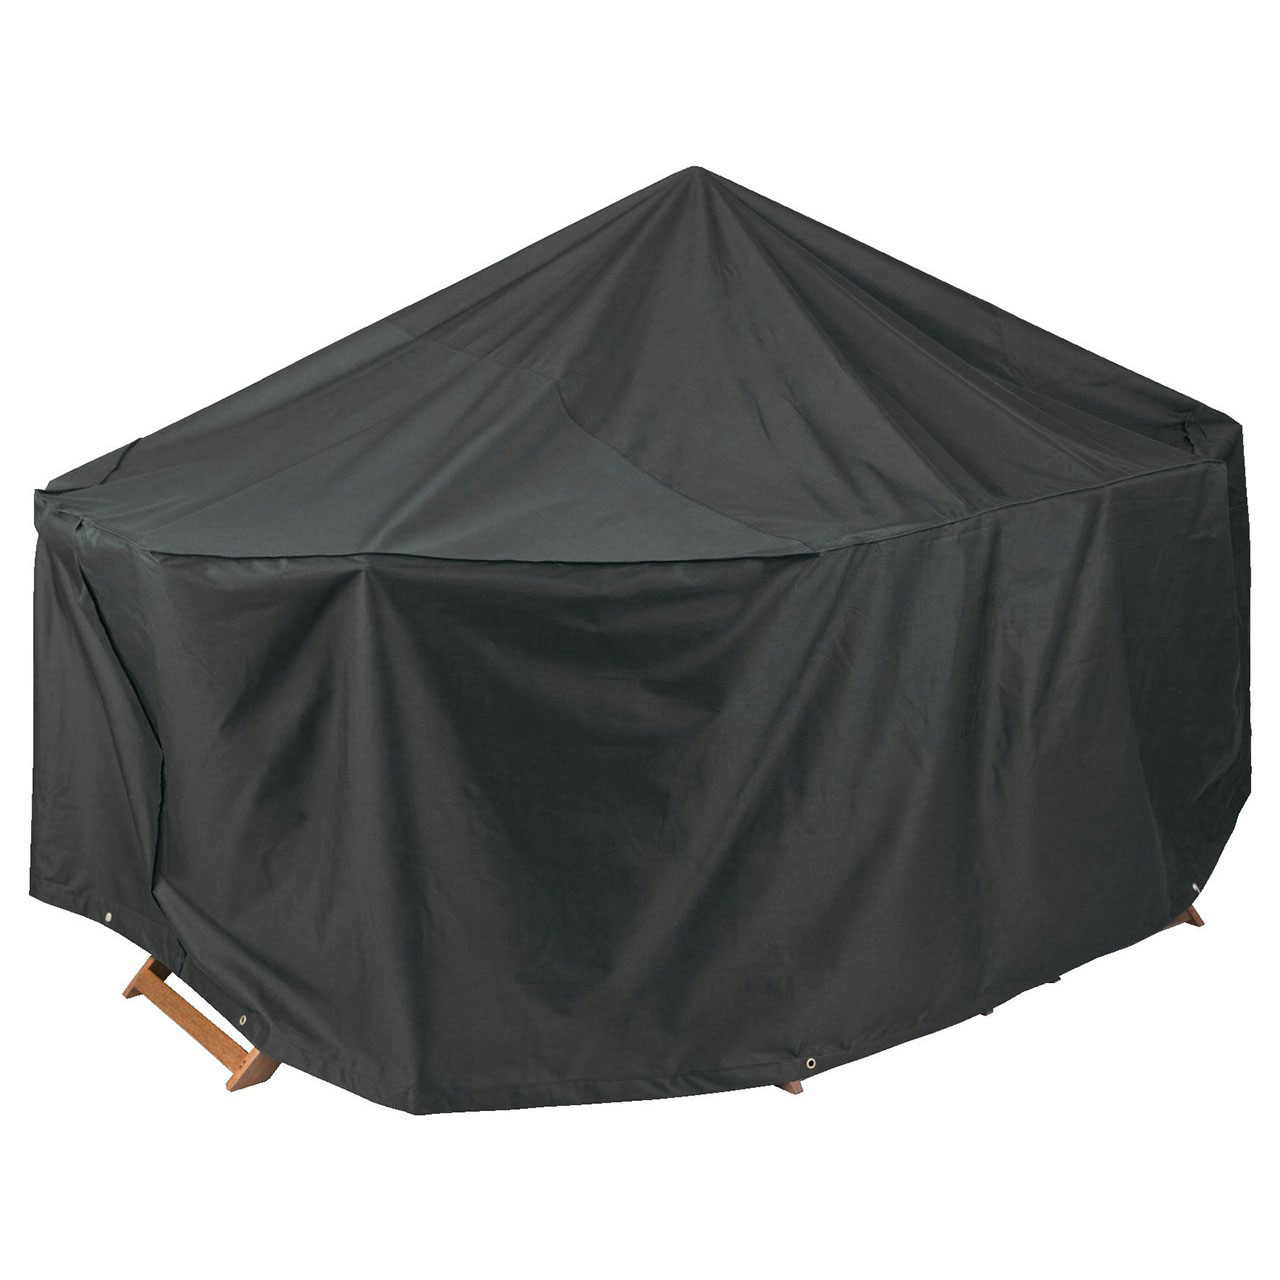 Weather-Proof 4-Seater Rectangular Patio Set cover